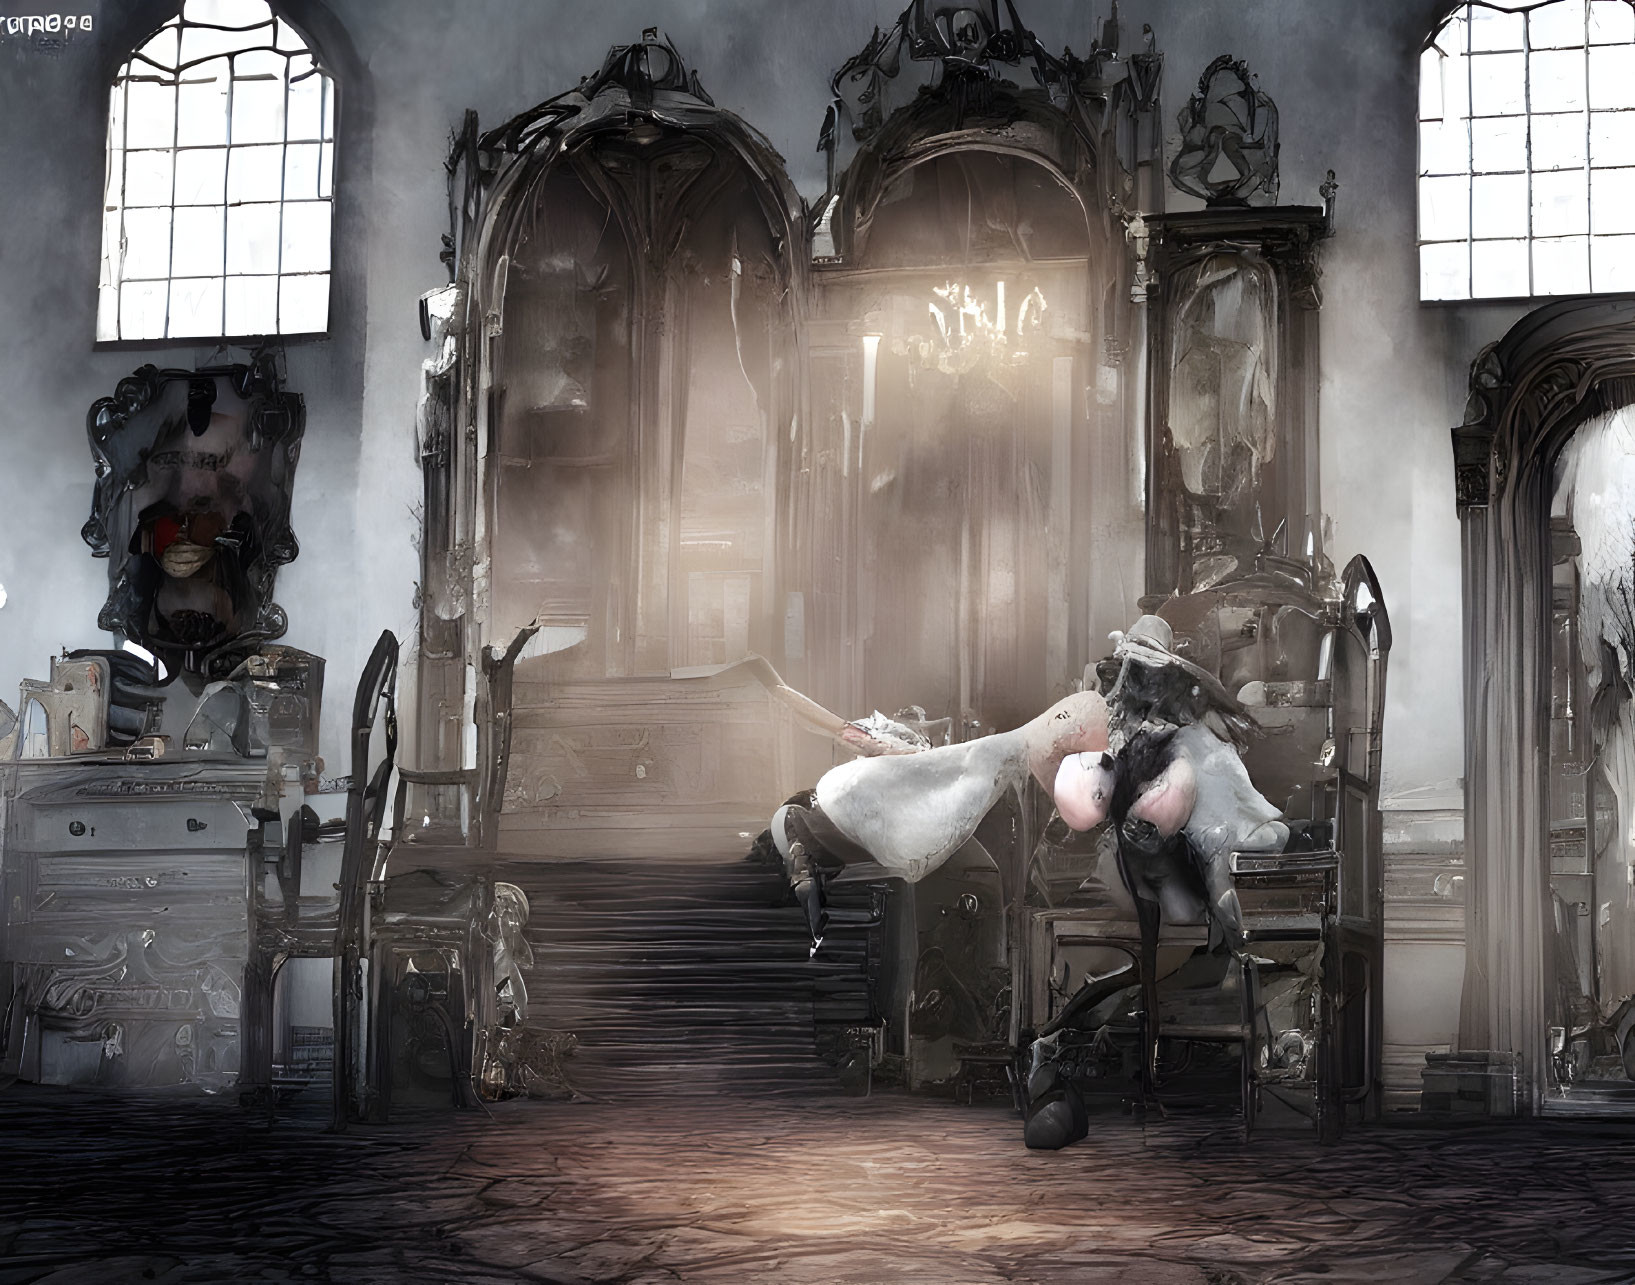 Opulent, Dilapidated Room with Gothic Windows, Grand Throne, and Figure in White